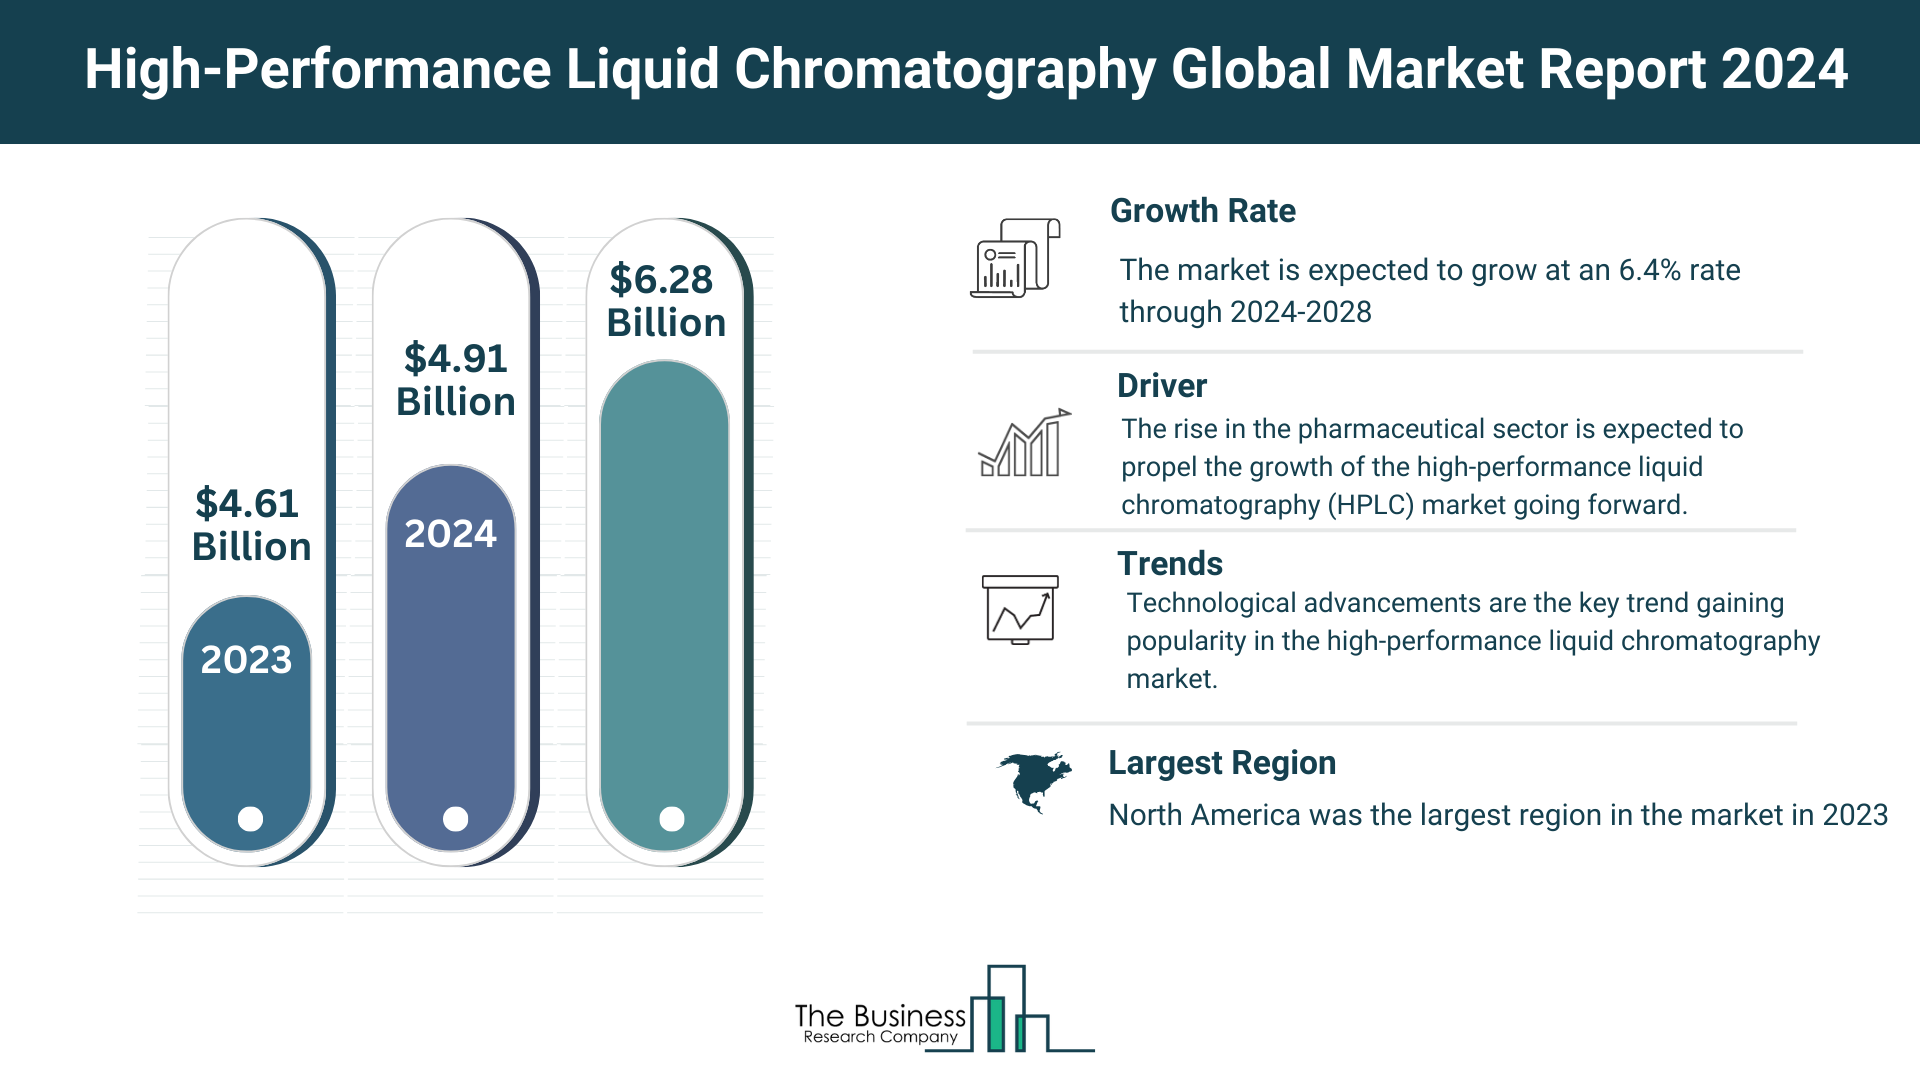 Global High-Performance Liquid Chromatography Market Analysis: Size, Drivers, Trends, Opportunities And Strategies